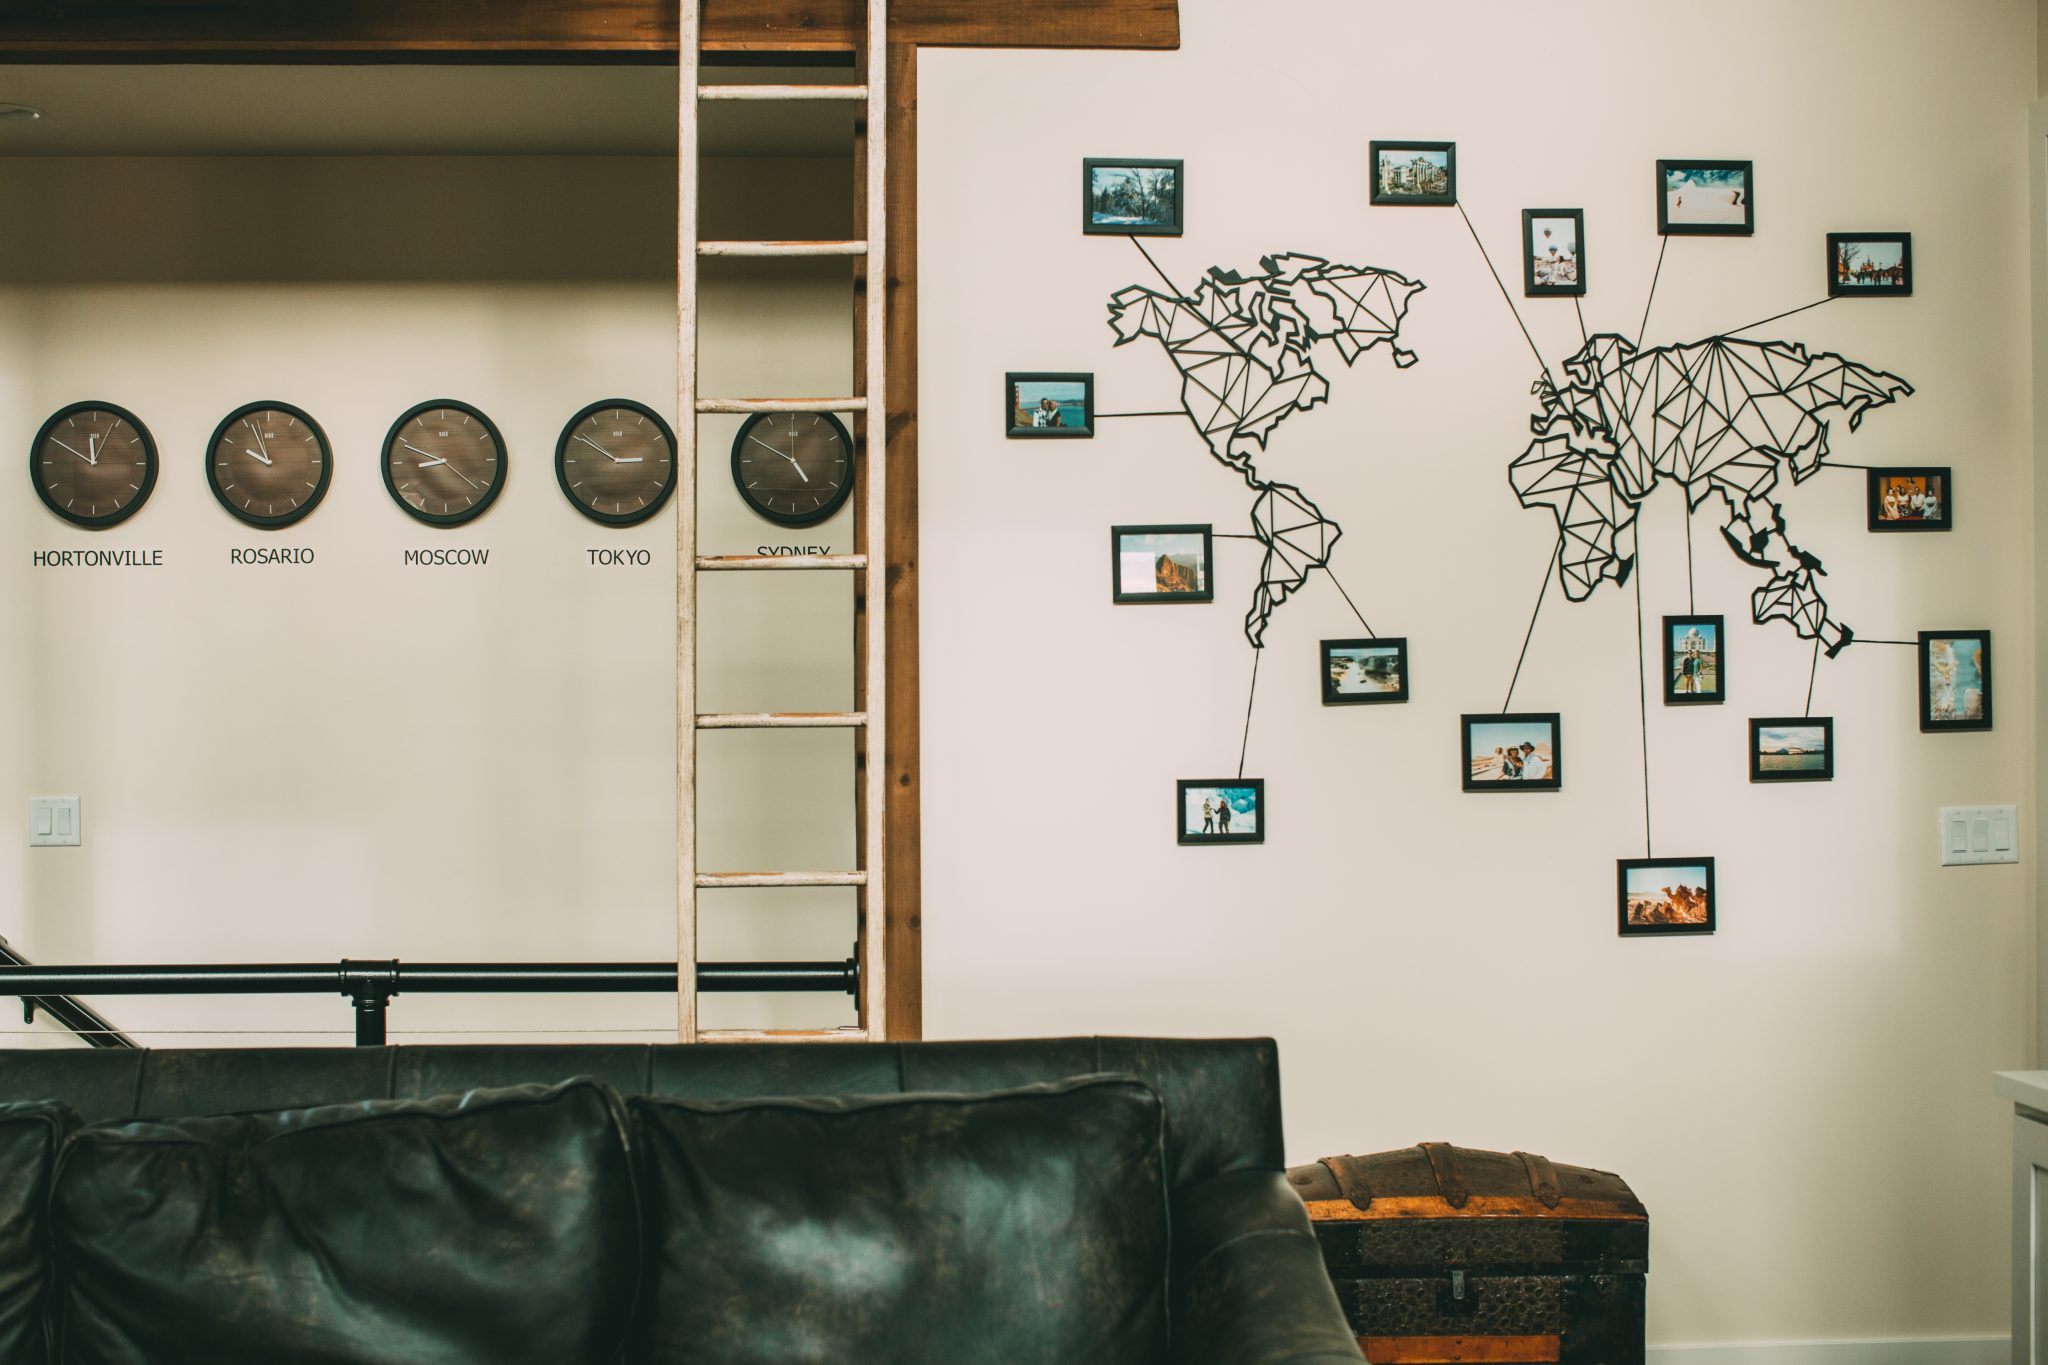 A photo of two creative travel wall ideas -- on the left, a time zone wall with five clocks set to different travel locations. On the right, a map photo wall with framed photos tied to different locations on the map.